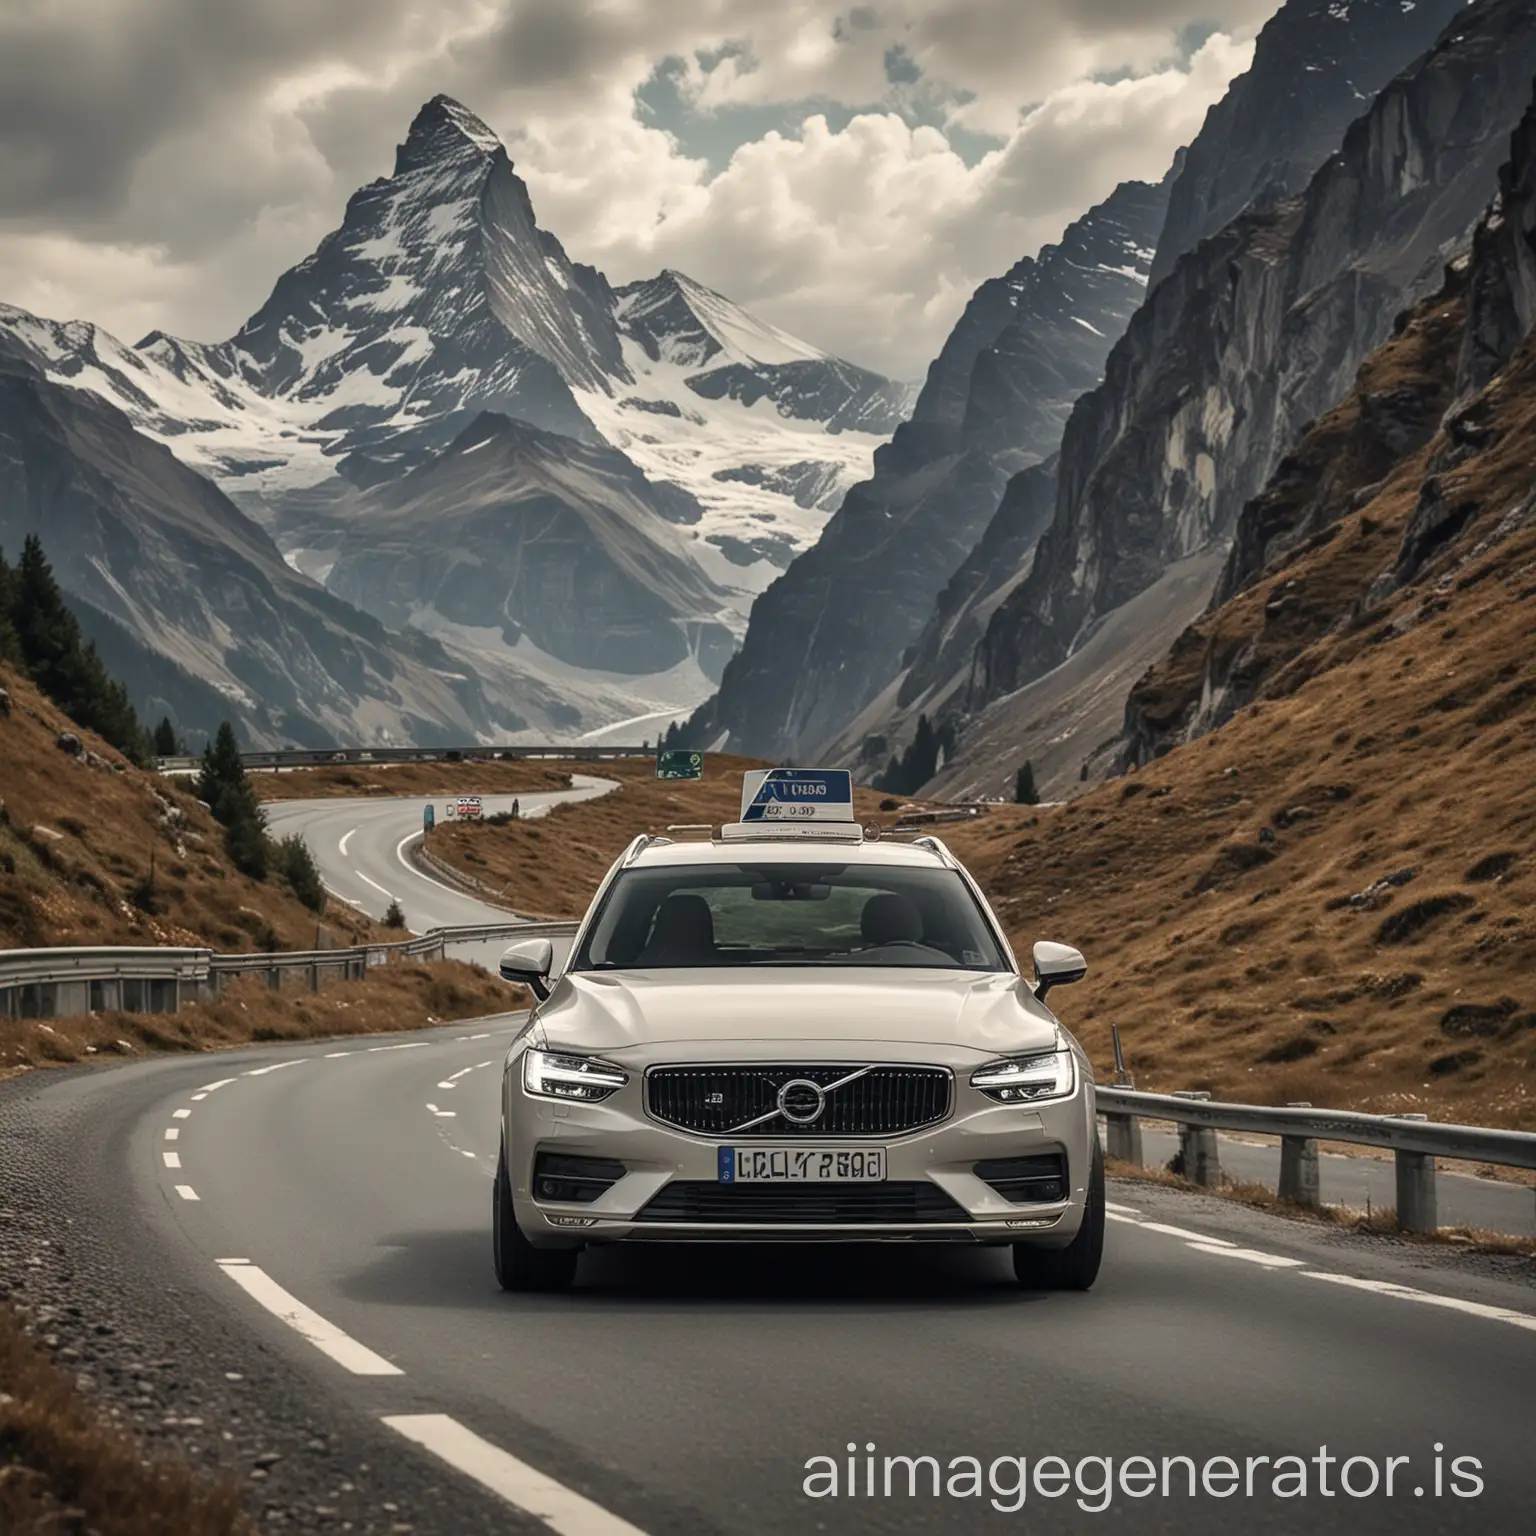 Create an image of a Volvo  and a Kia with licence plate "C-Hans" driving on a mountainous road with many curves, with the Matterhorn and other mountains in the background.